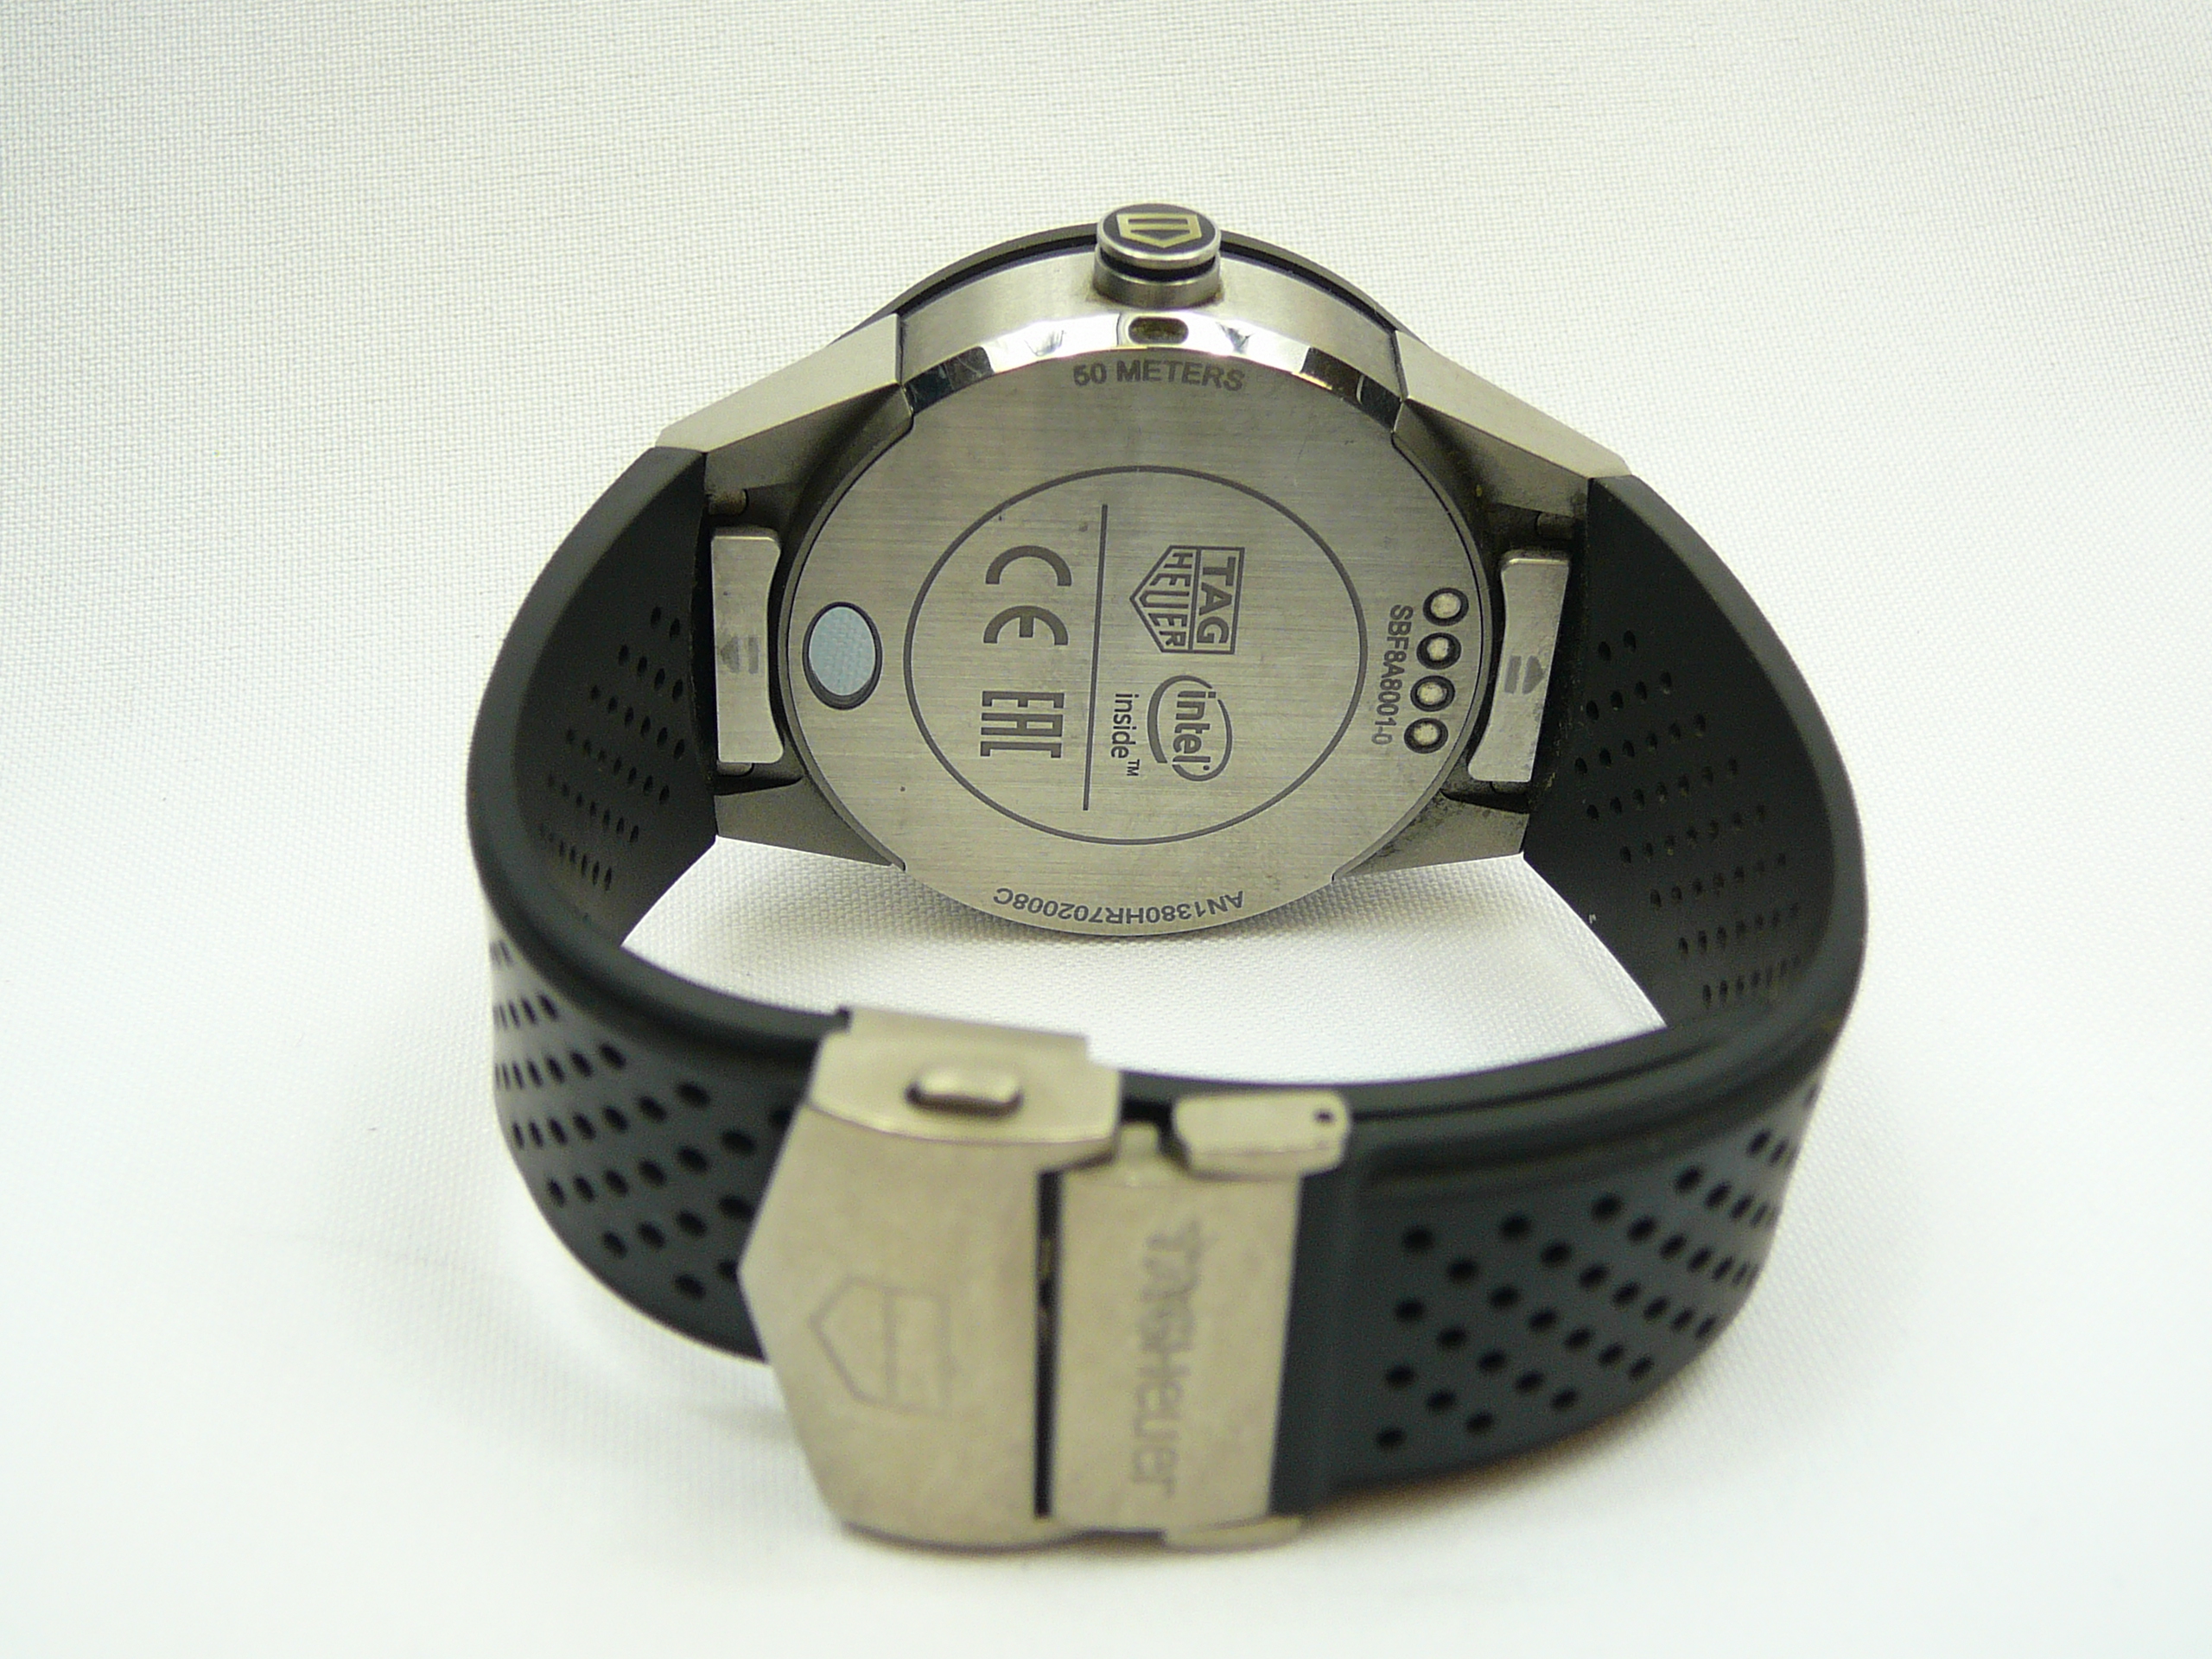 Tag Heuer Smart Watch - Image 6 of 7